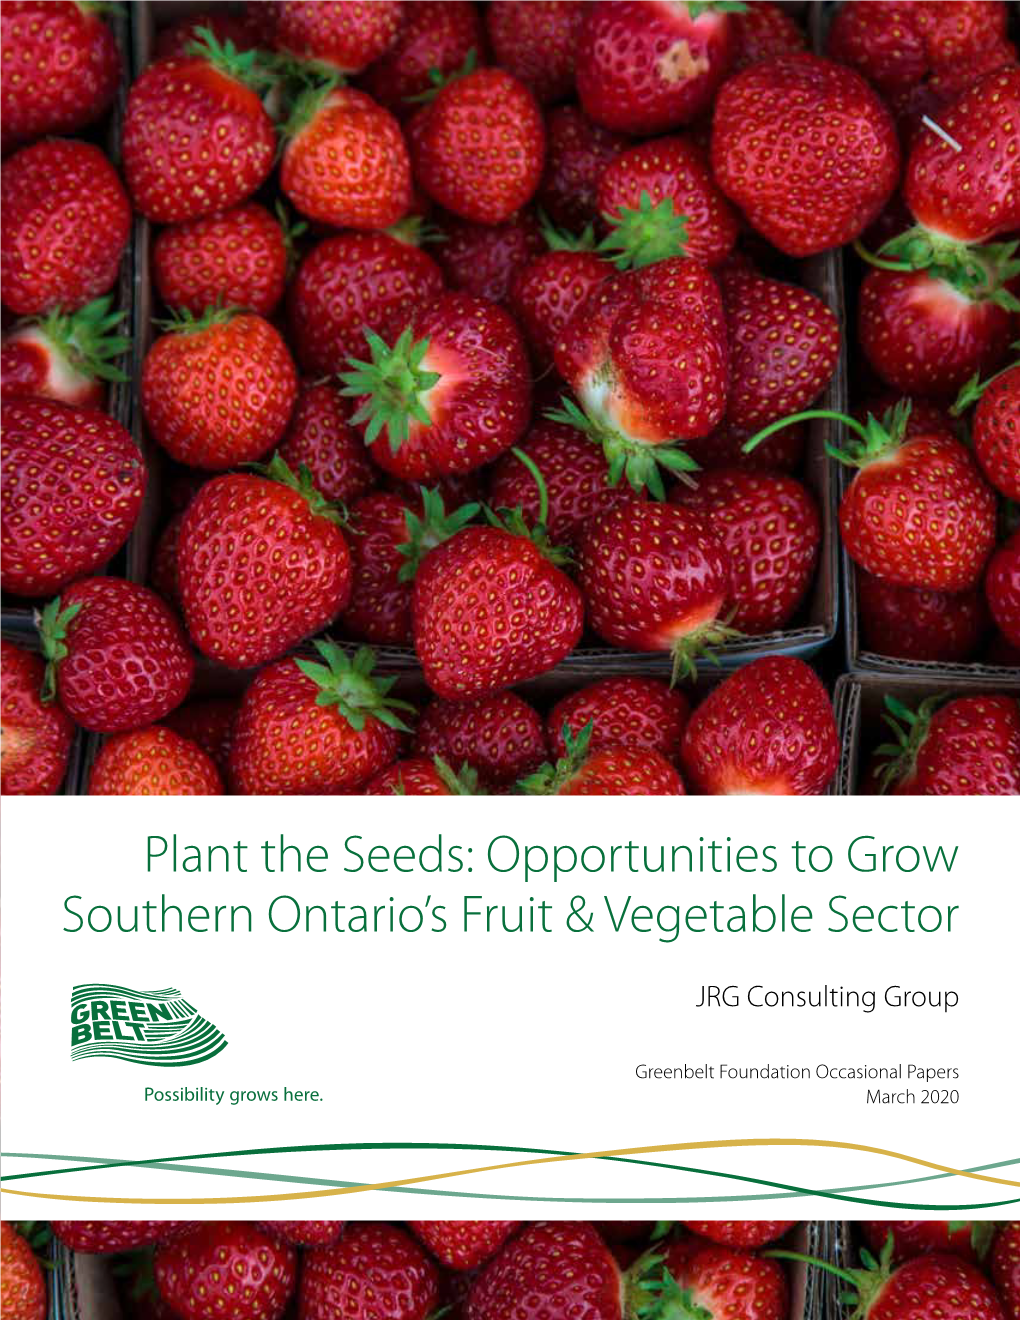 Opportunities to Grow Southern Ontario's Fruit